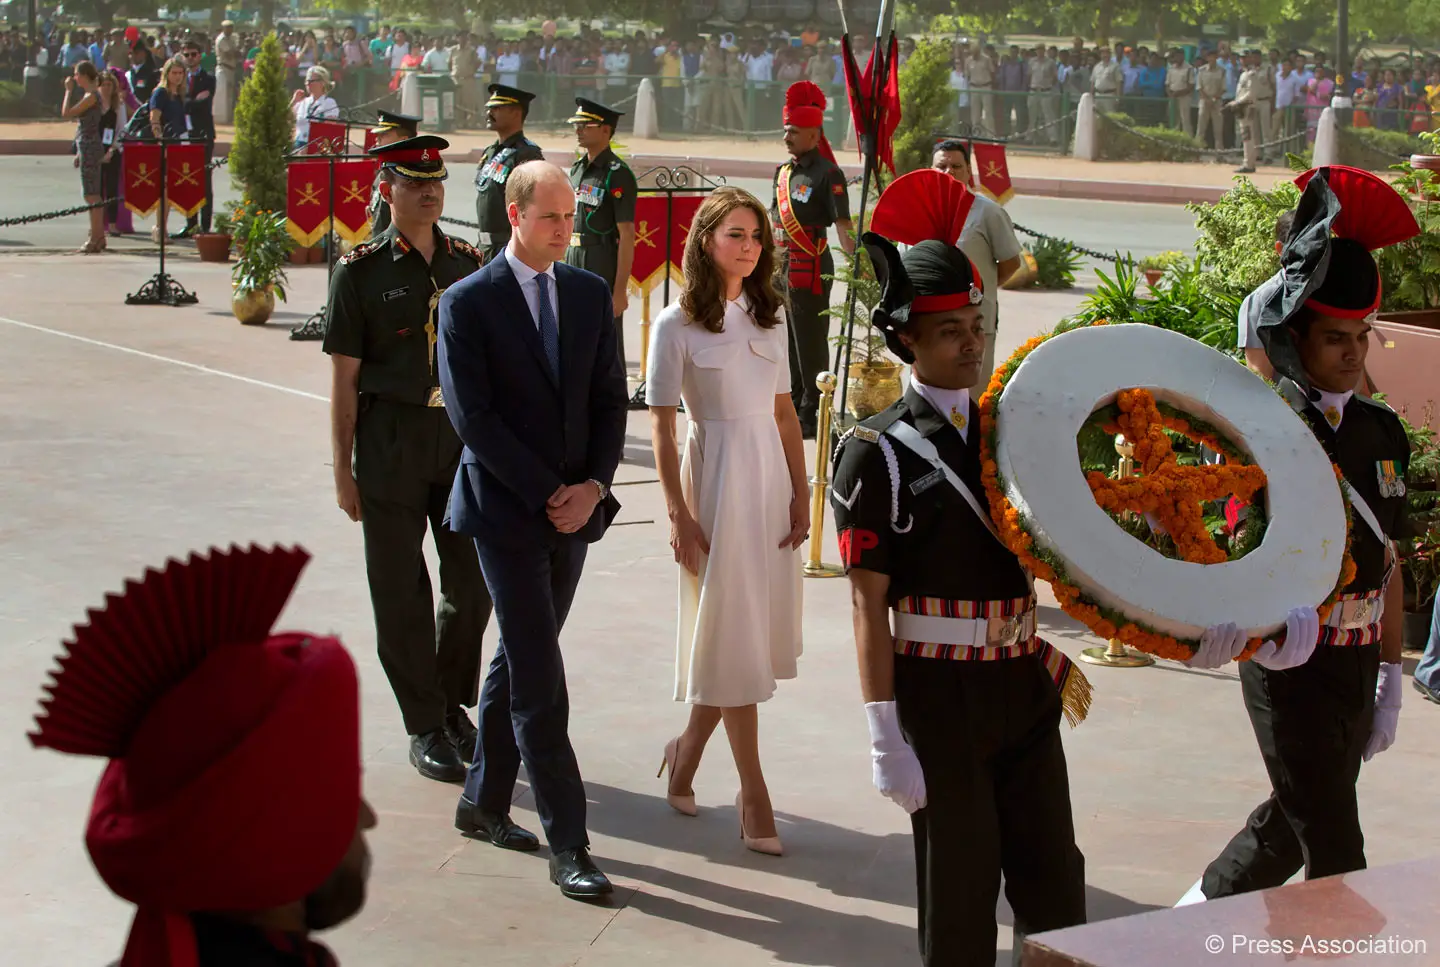 William and Catherine began their Delhi programme with a wreath-laying at India Gate. This memorial is situated in the heart of New Delhi.